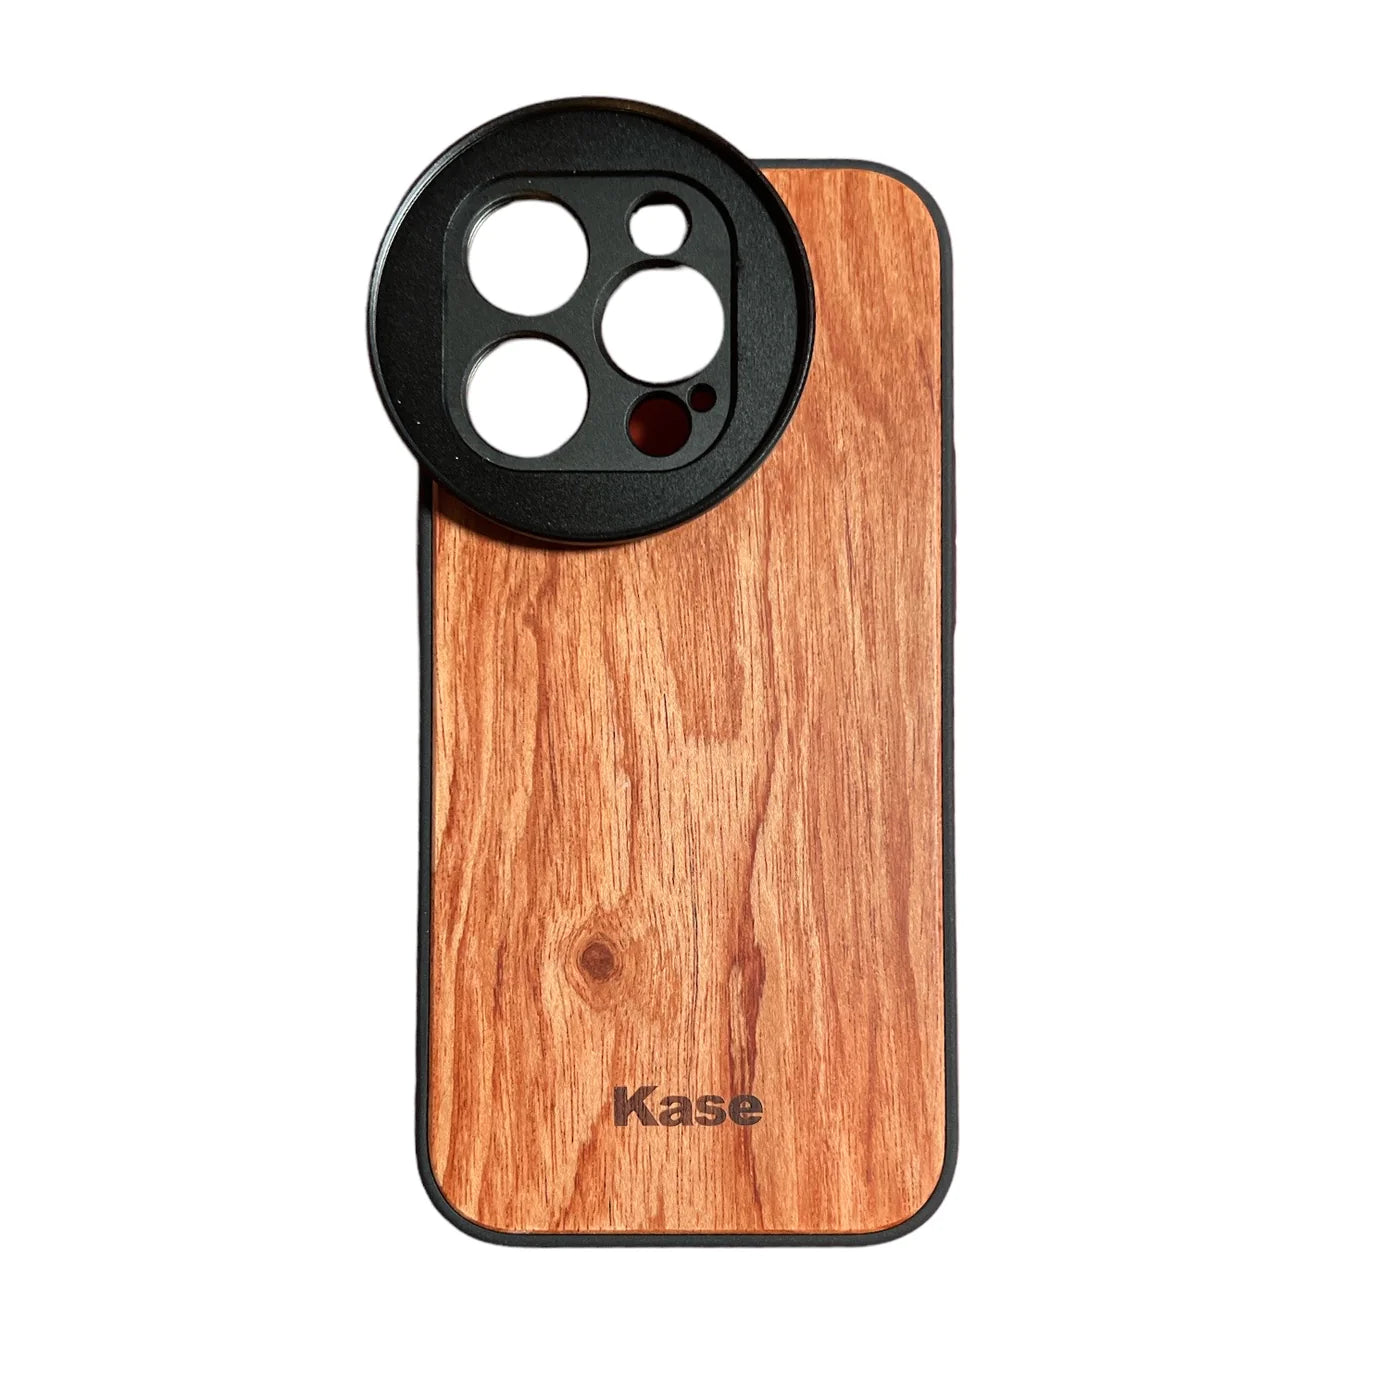 Kase Lens Protective Case for iPhone 14 Series